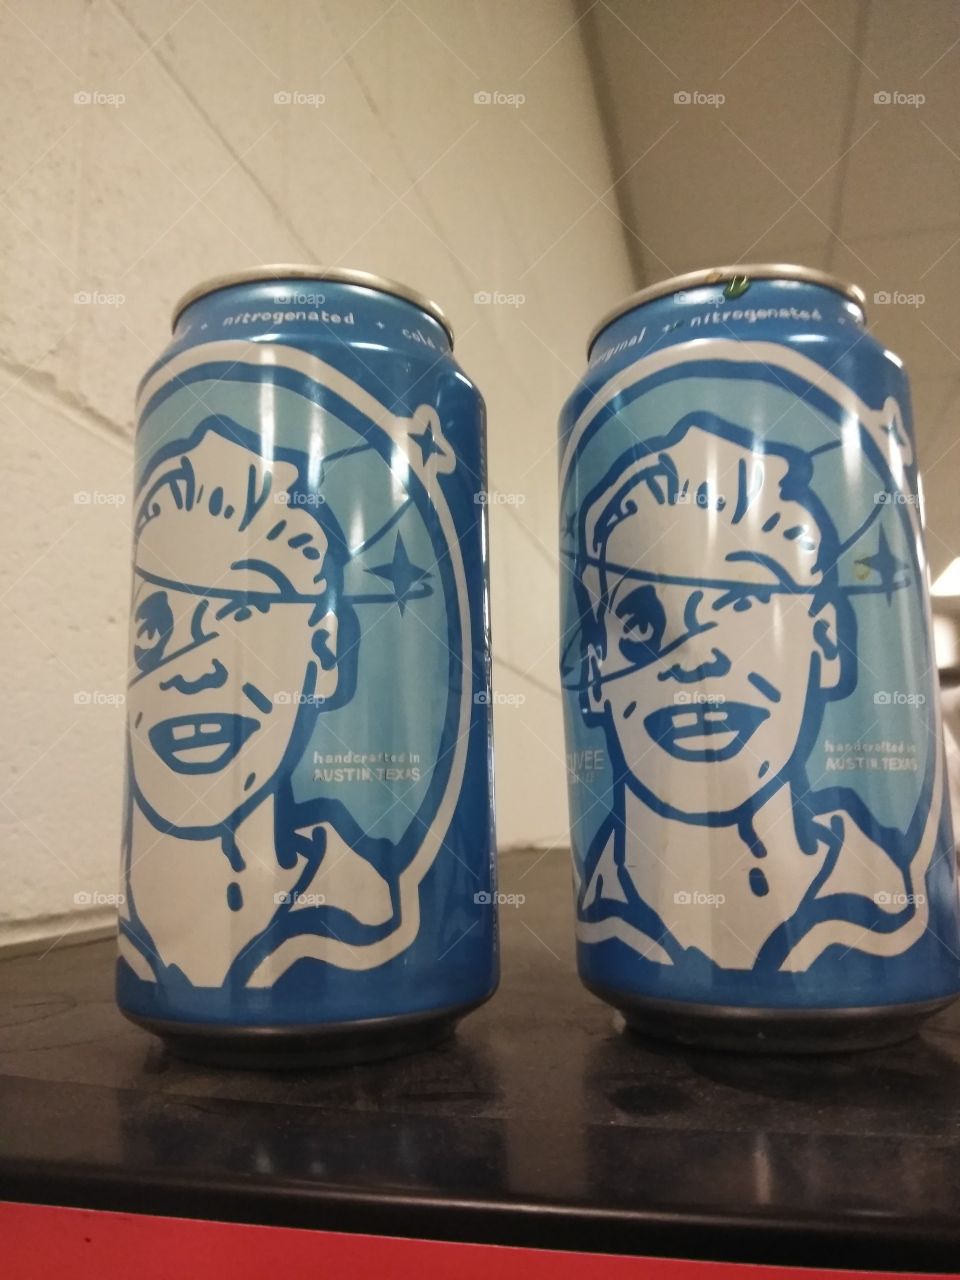 strangest cans